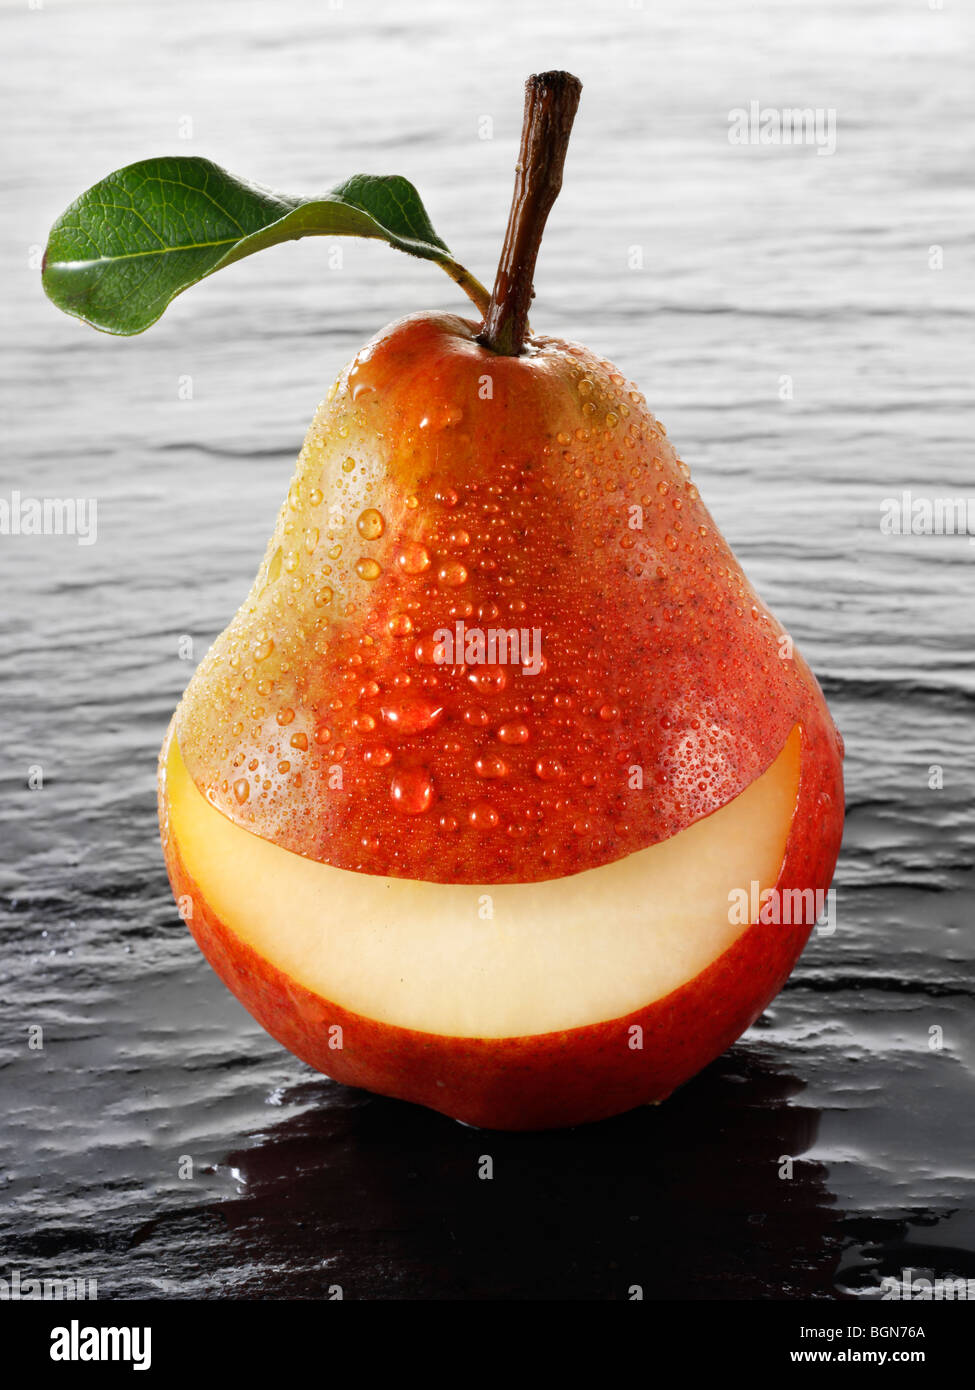 Wole Red Williams pear with a smiley face Stock Photo